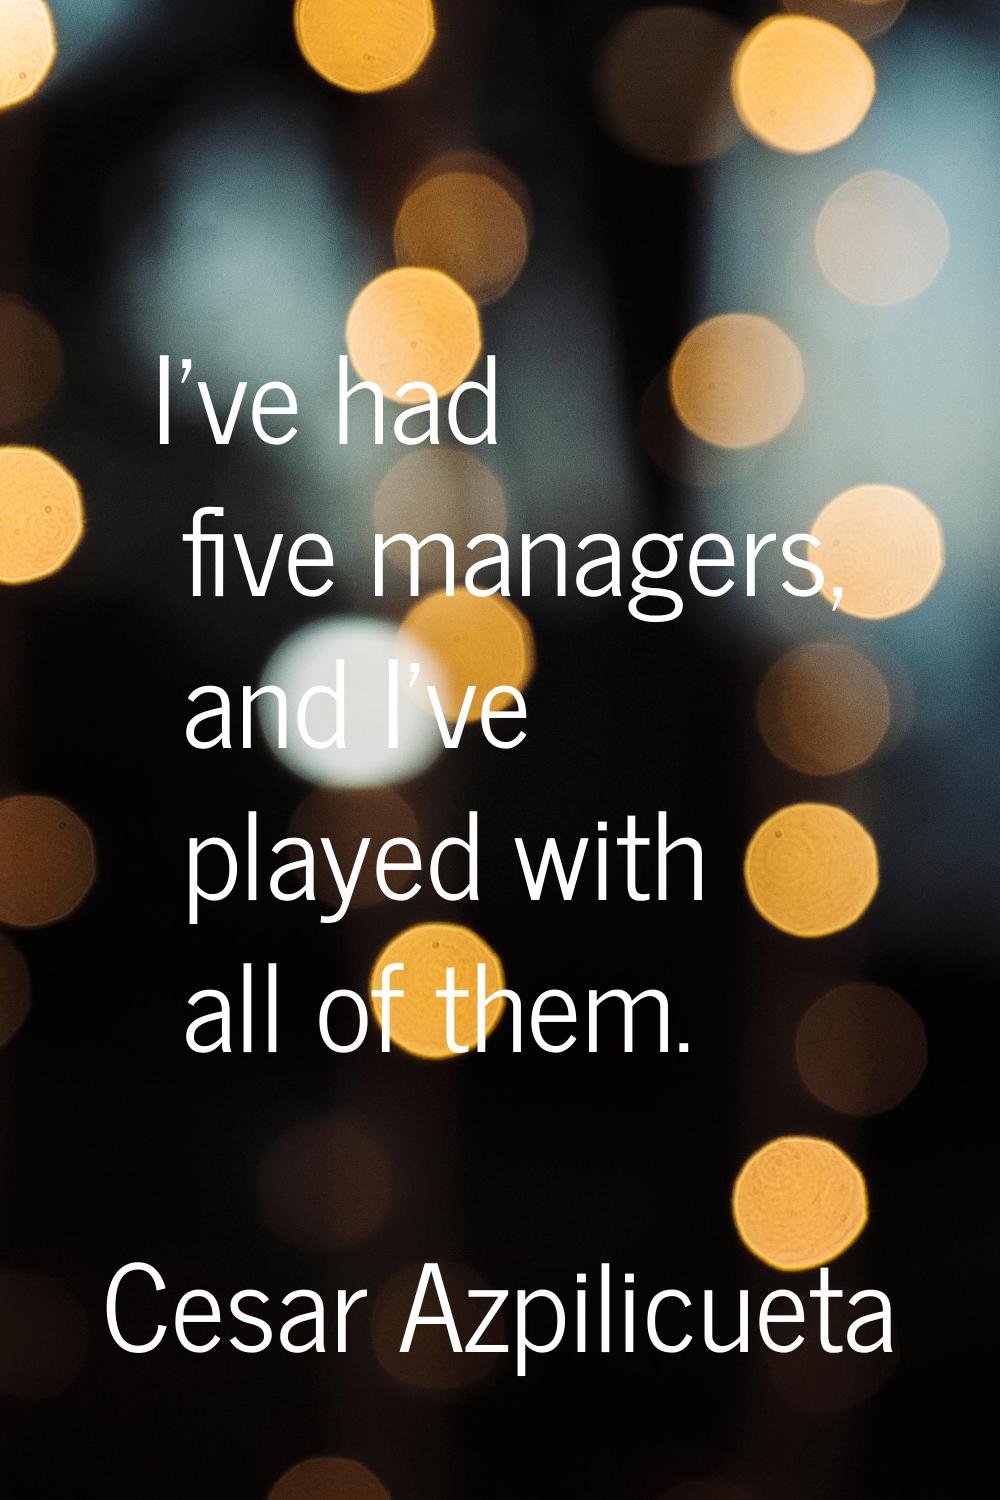 I've had five managers, and I've played with all of them.